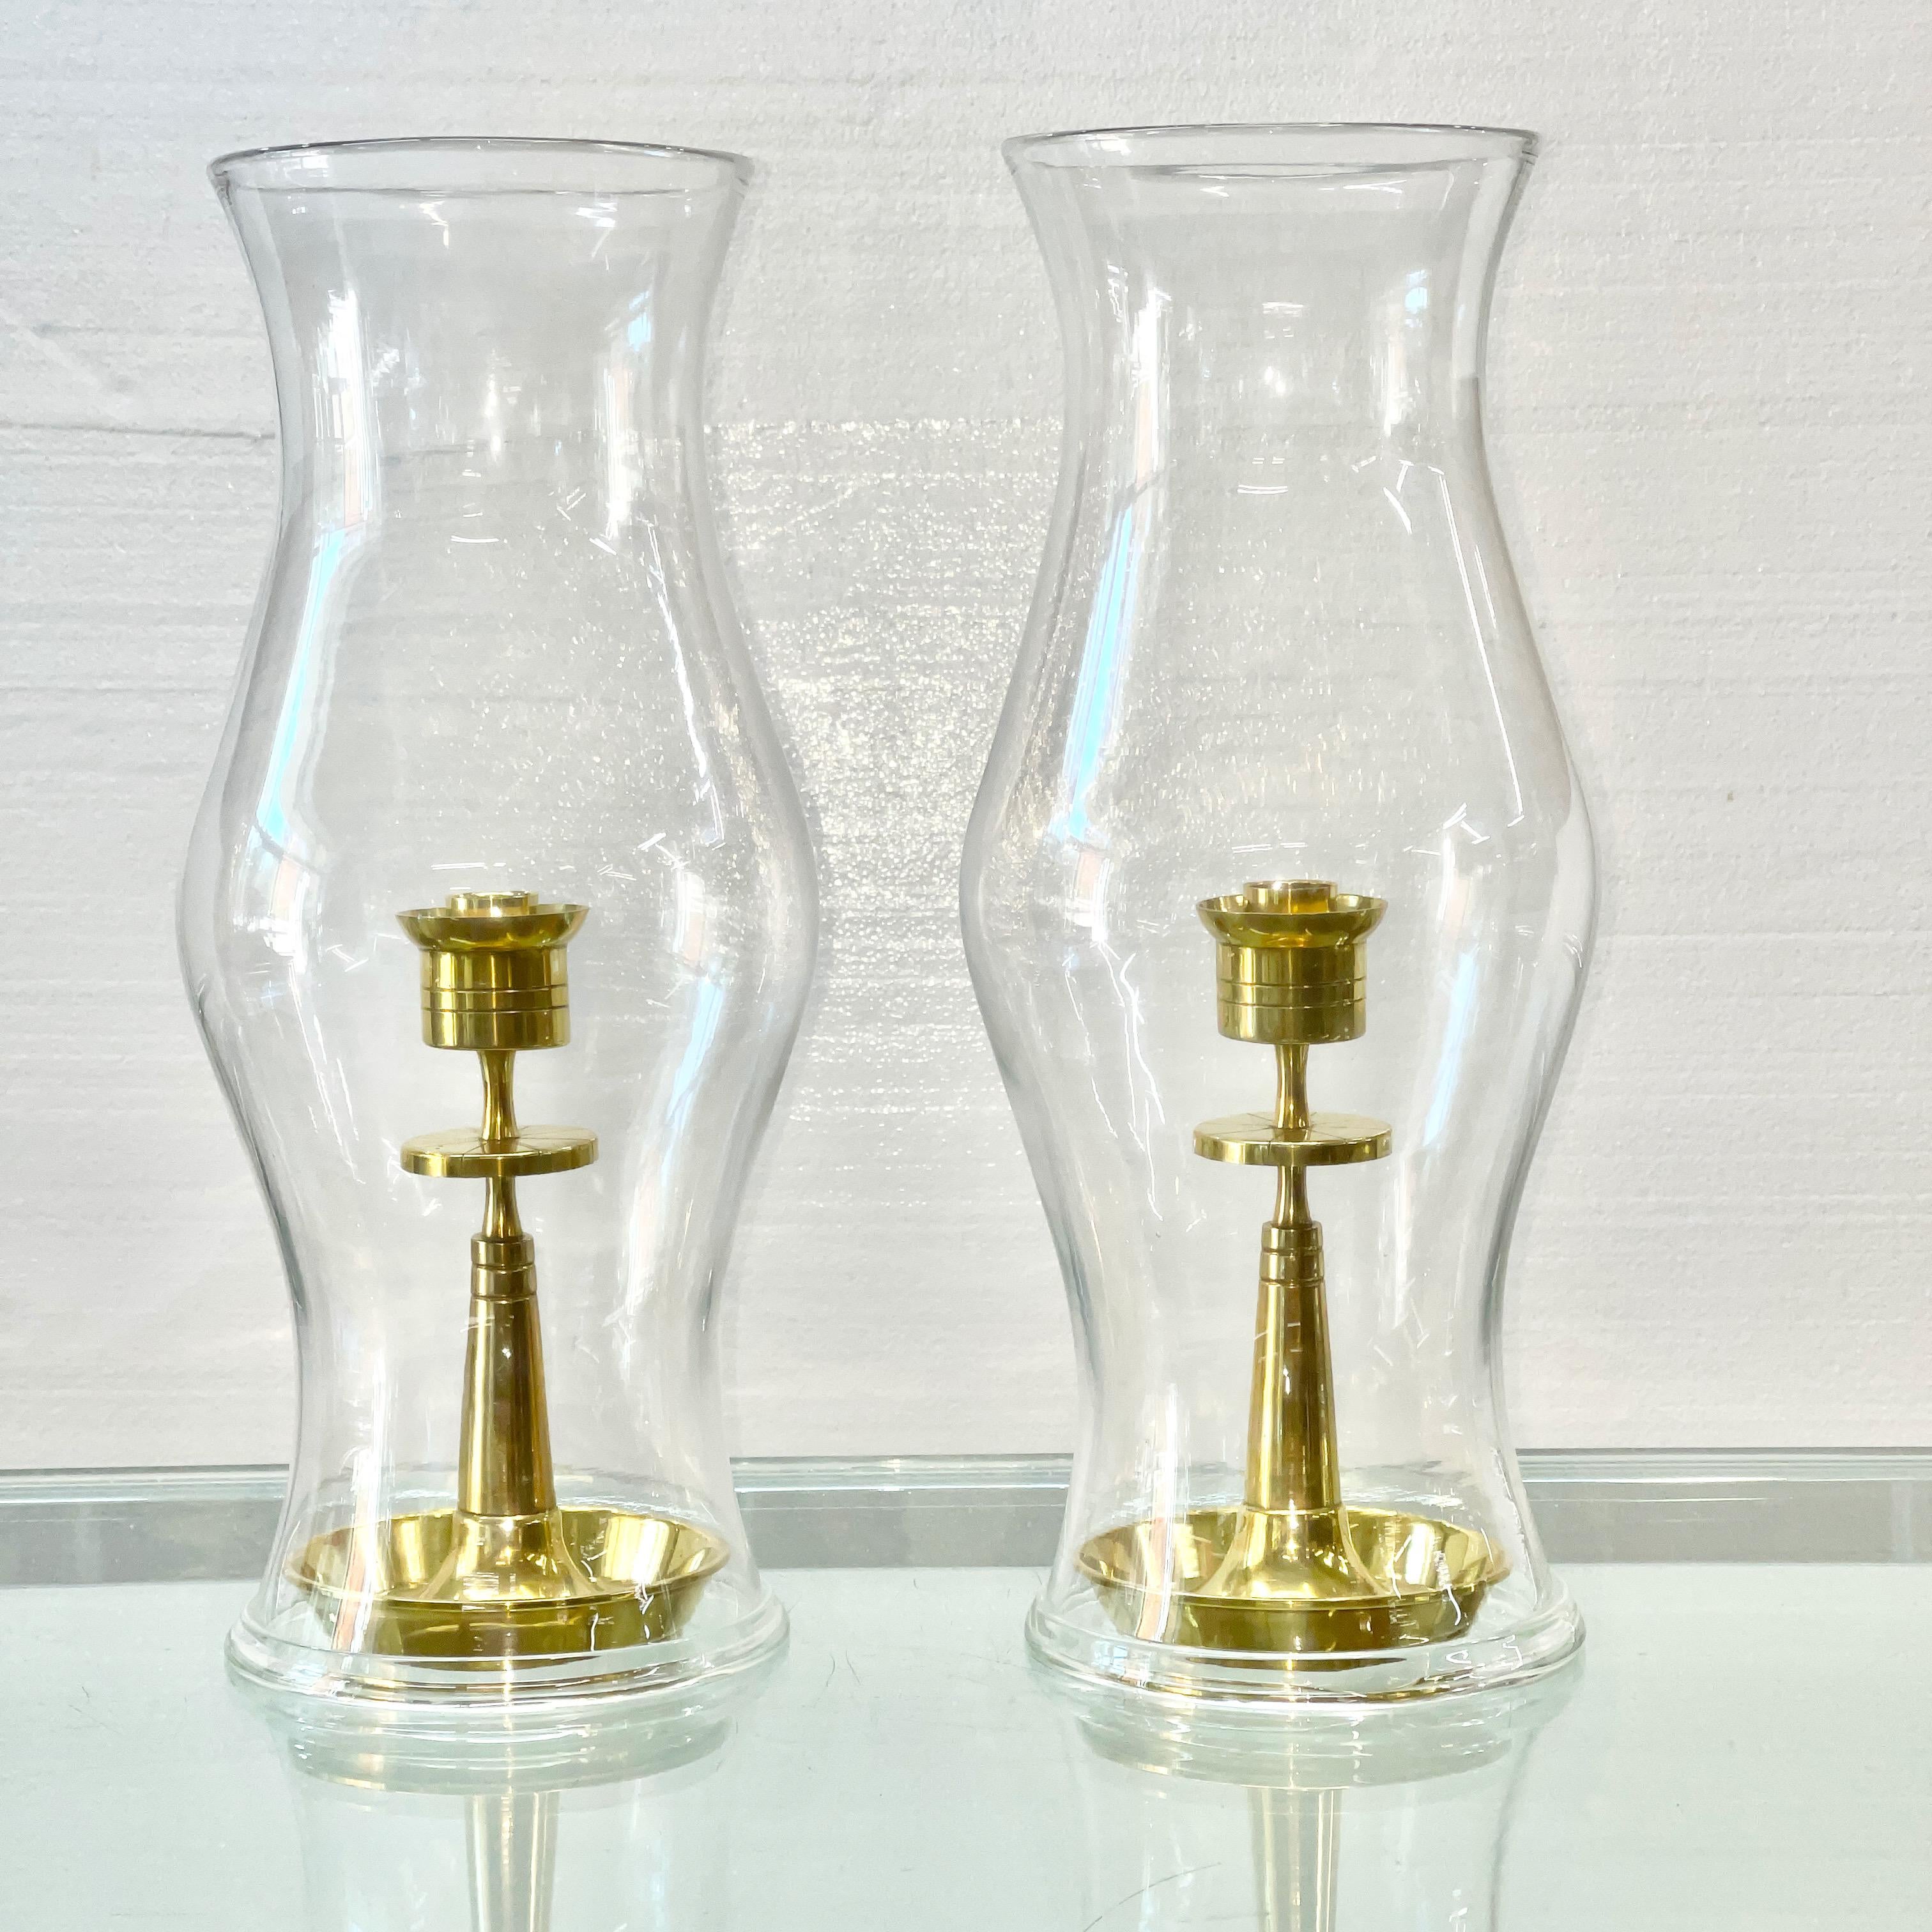 Tommi Parzinger for Dorlyn Brass Candleholders in Hurricane Shades For Sale 7